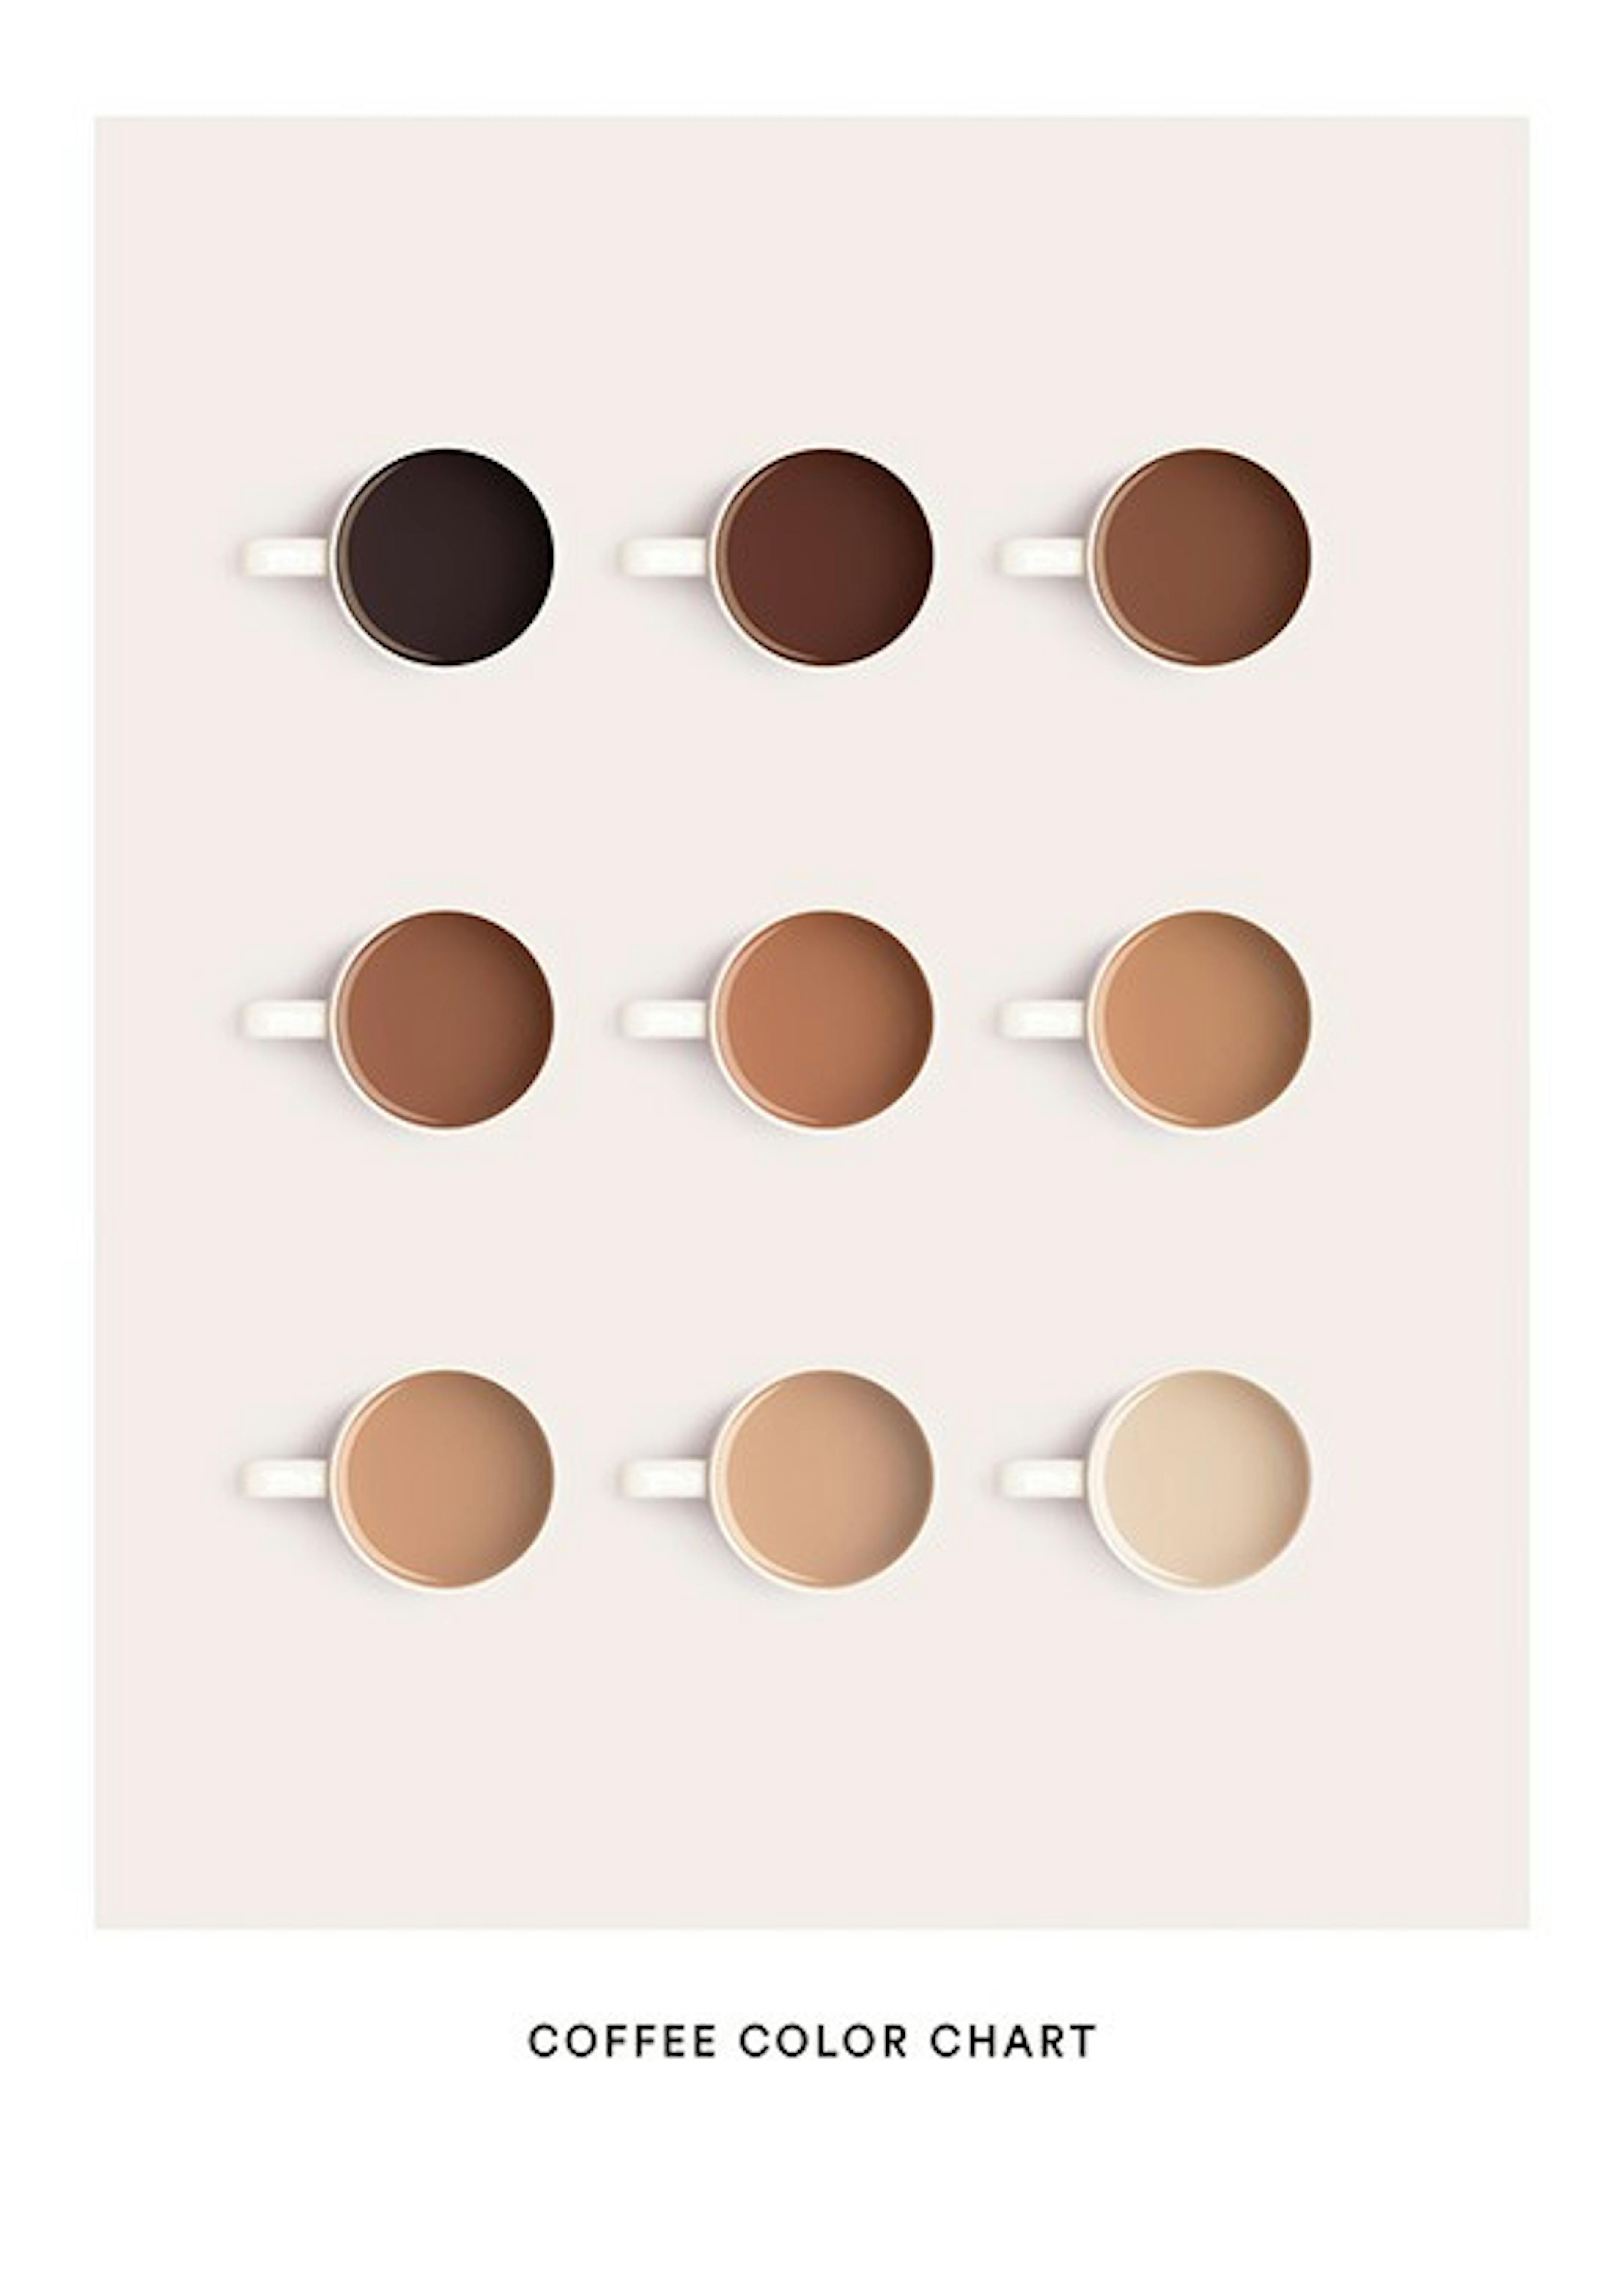 Coffee Color Chart Poster 0